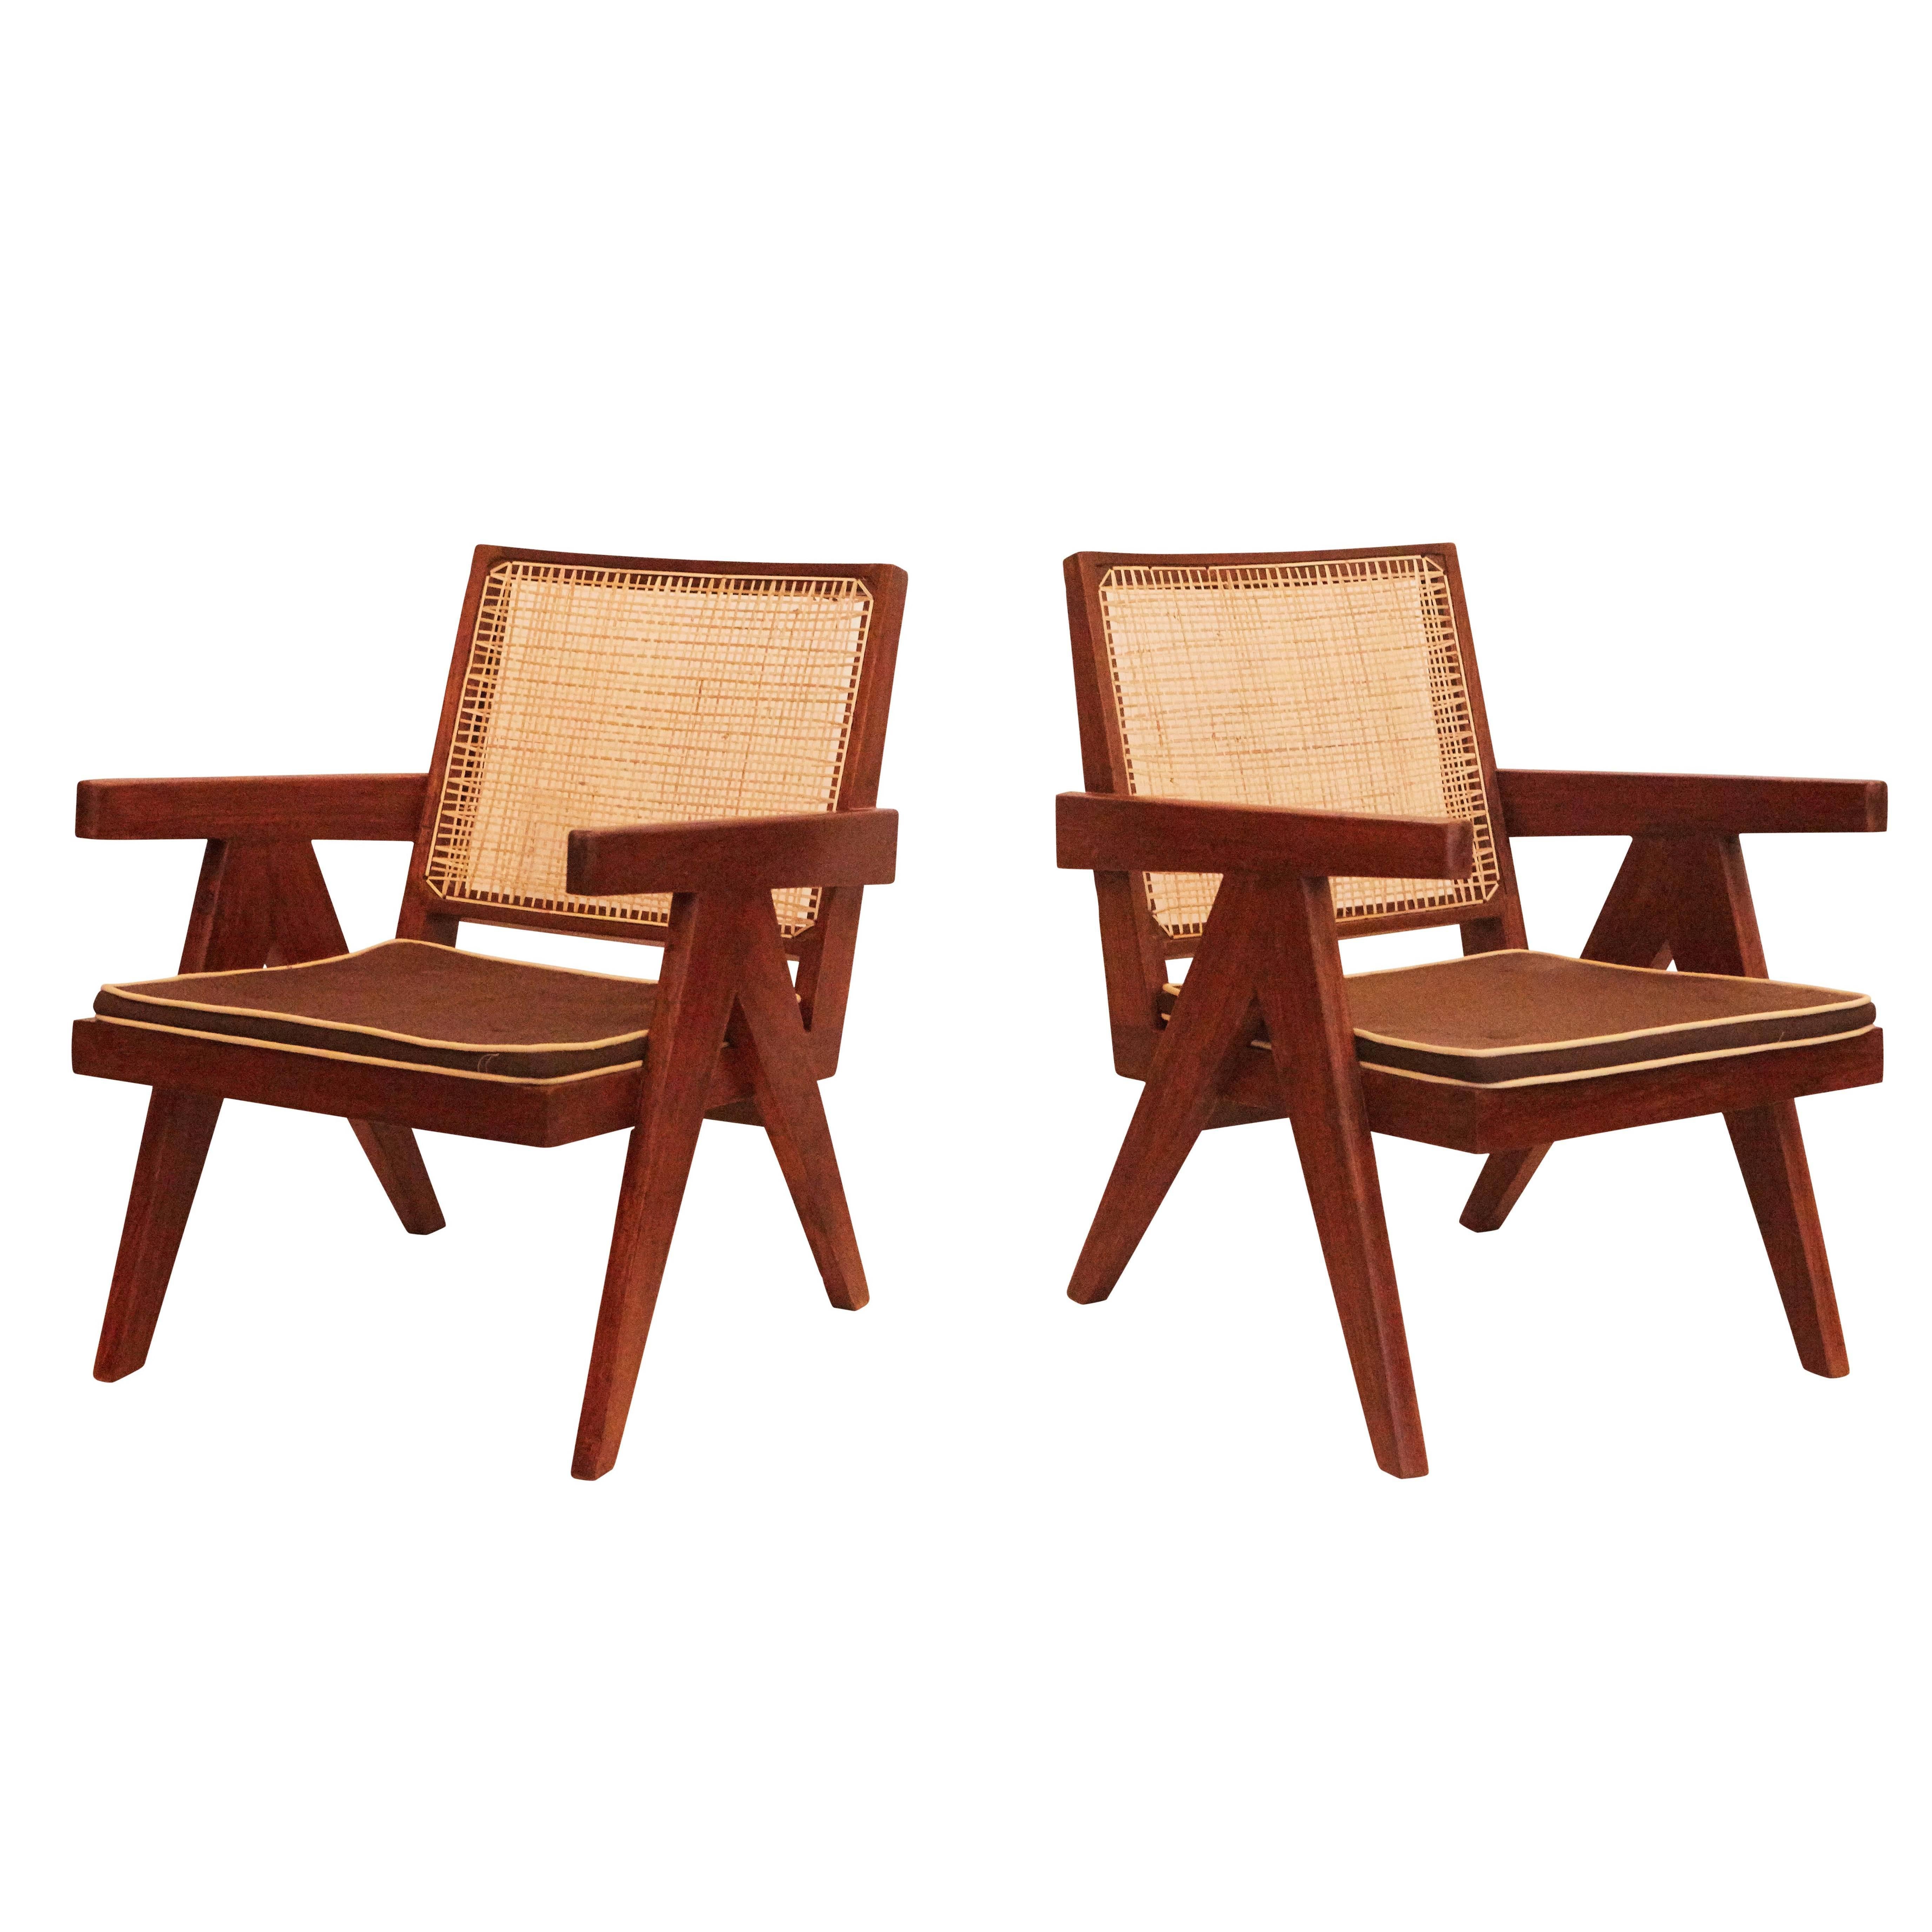 Pair of Pierre Jeanneret & Le Corbusier Easy Chairs, India / France, 1955 For Sale